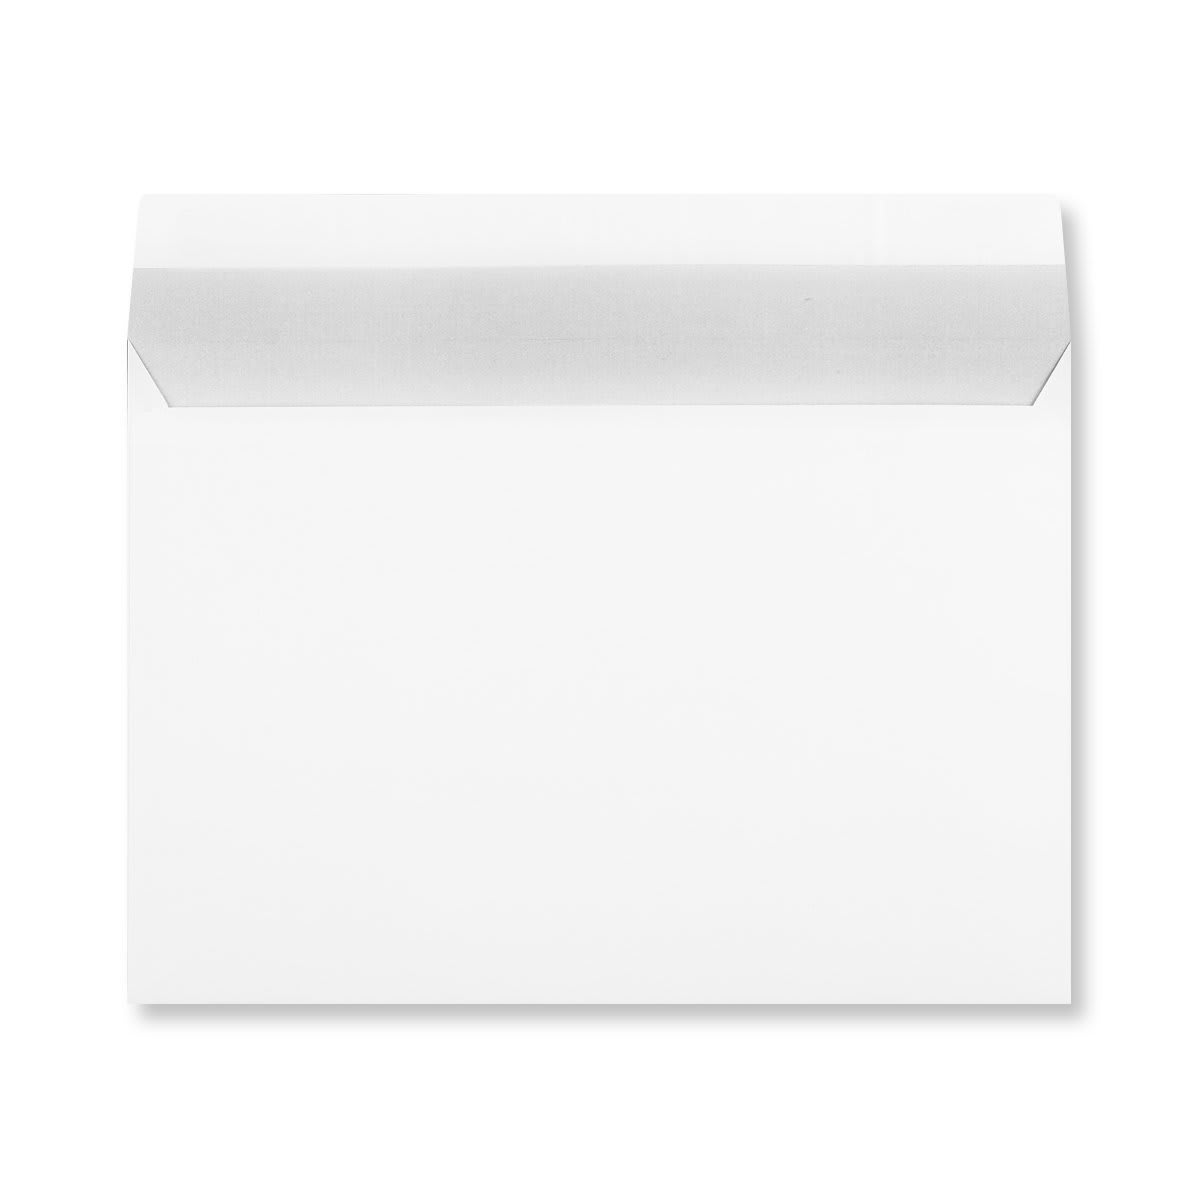 C5 WHITE WINDOW RIGHT SIDED PEEL AND SEAL ENVELOPES 120GSM